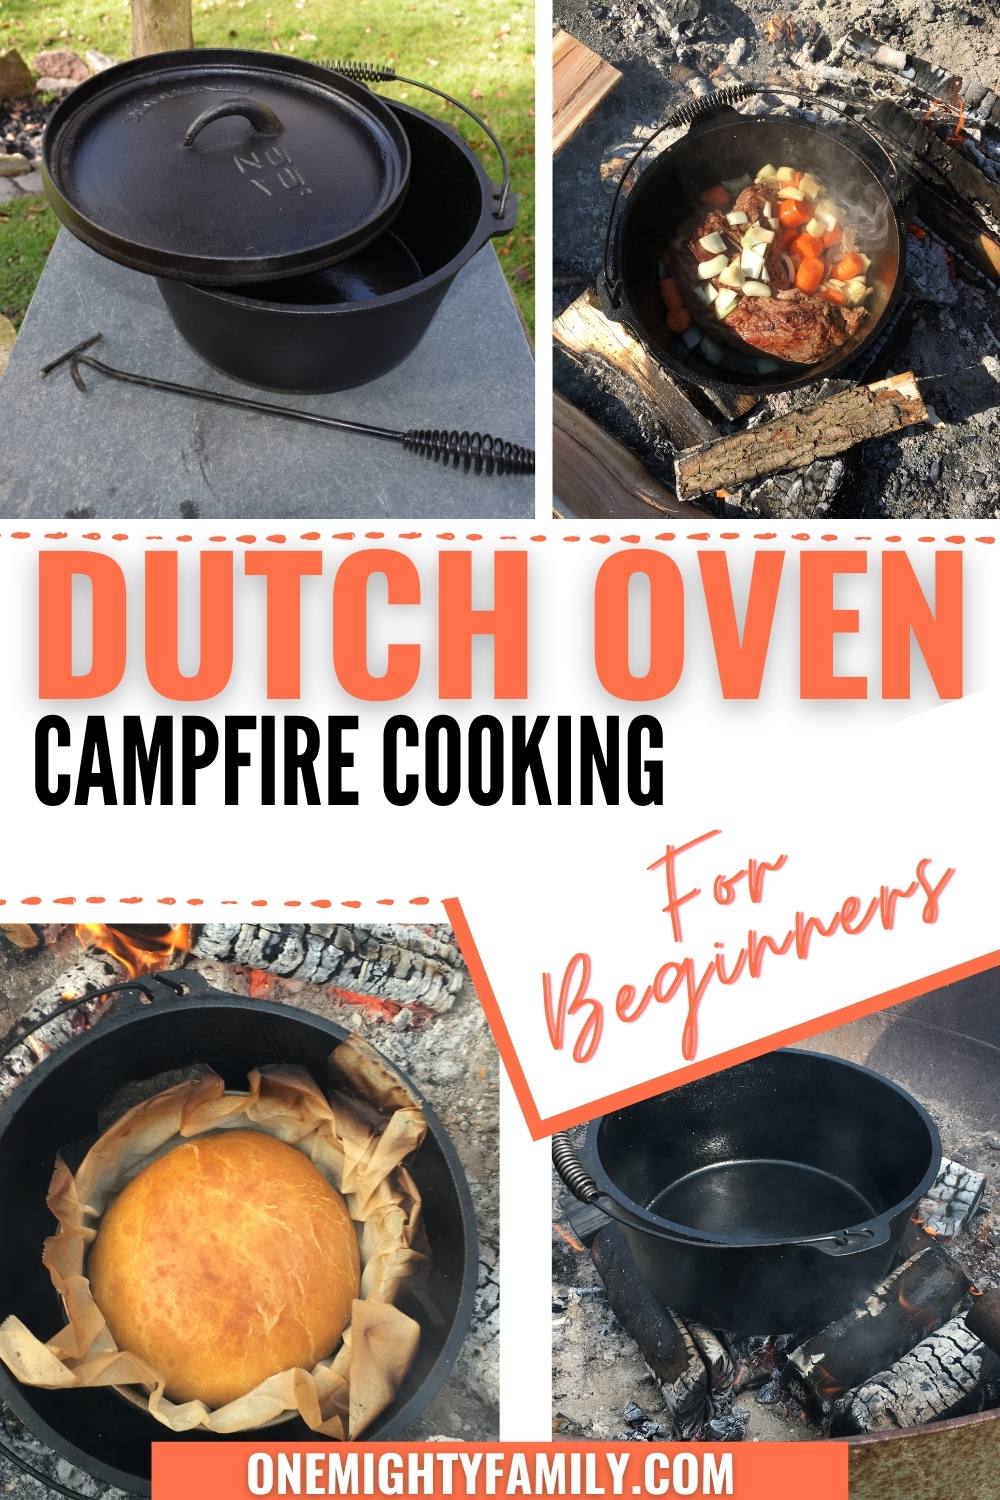 https://usercontent.one/wp/www.onemightyfamily.com/wp-content/uploads/Dutch-oven-campfire-cooking-for-beginners-a-complete-beginners-guide.jpg?media=1699553973